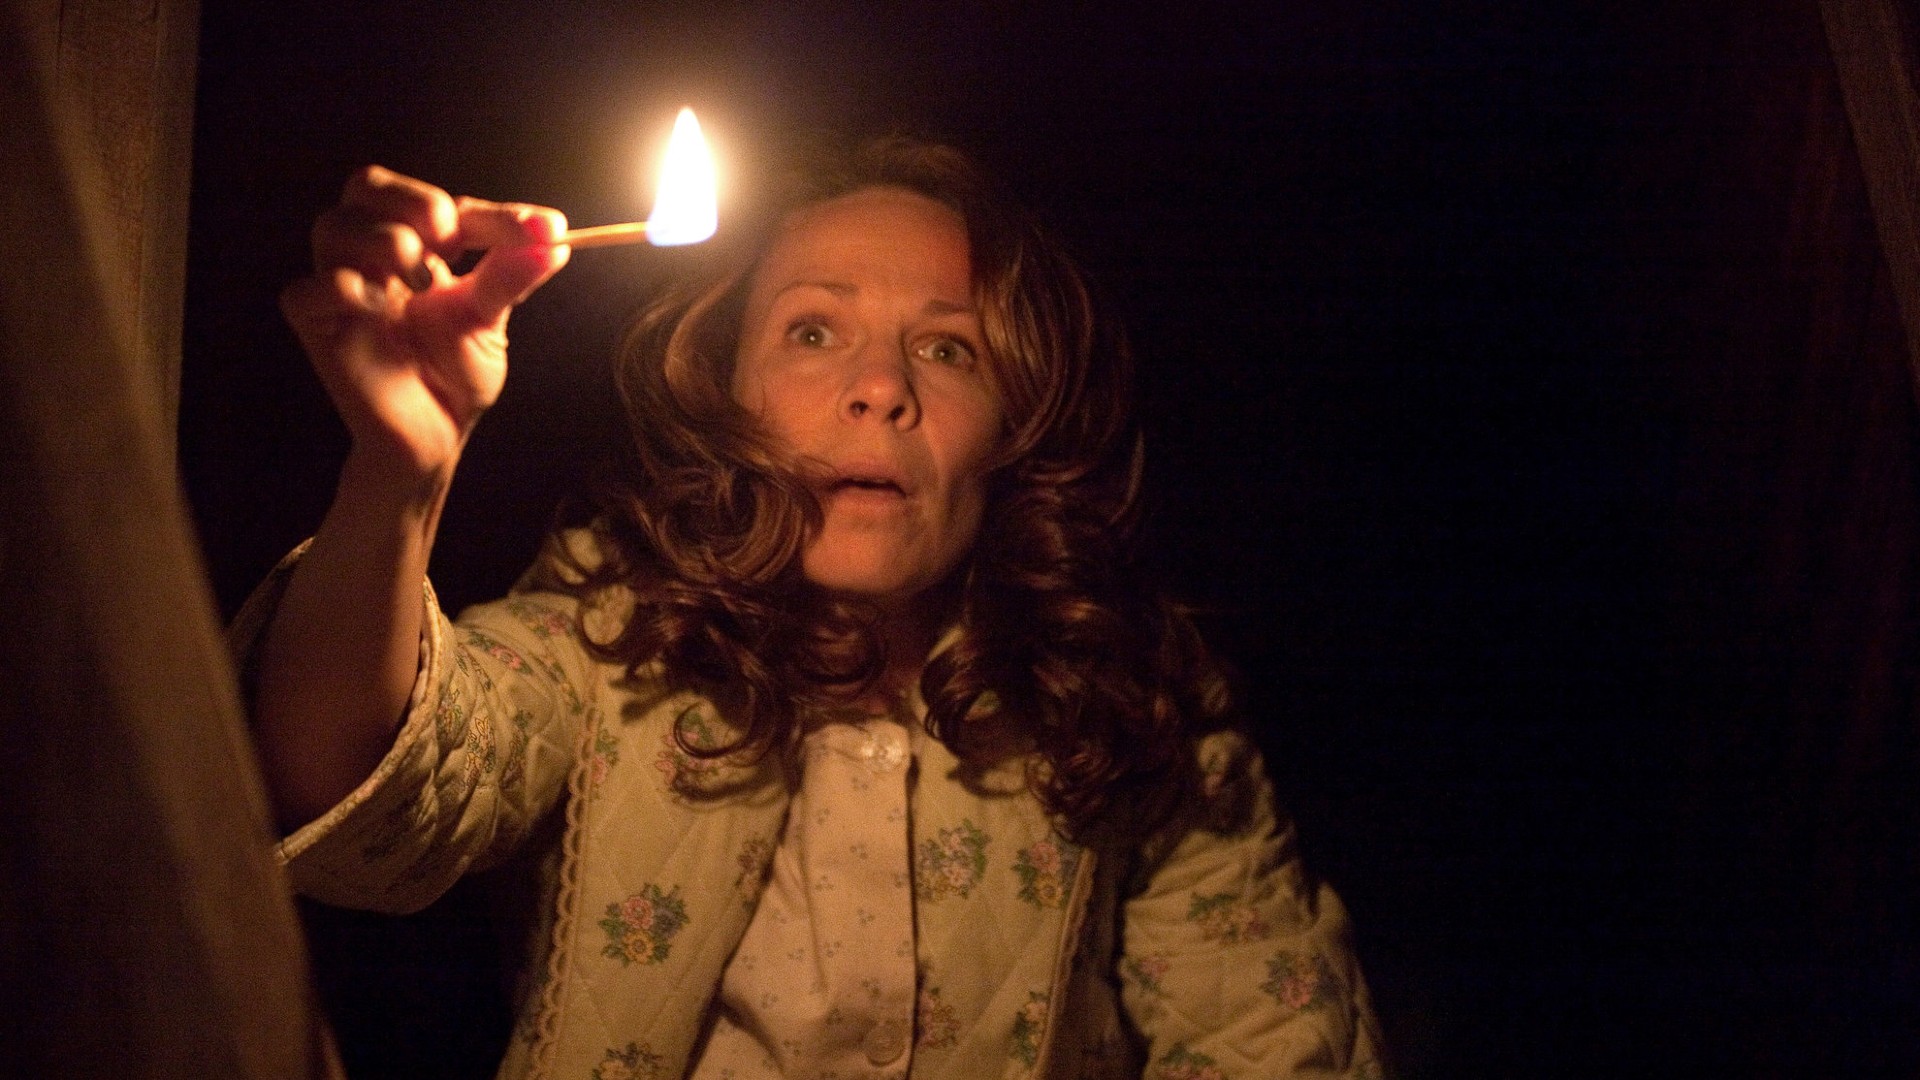 Lili Taylor holds a match up while staring down into a dark basement.